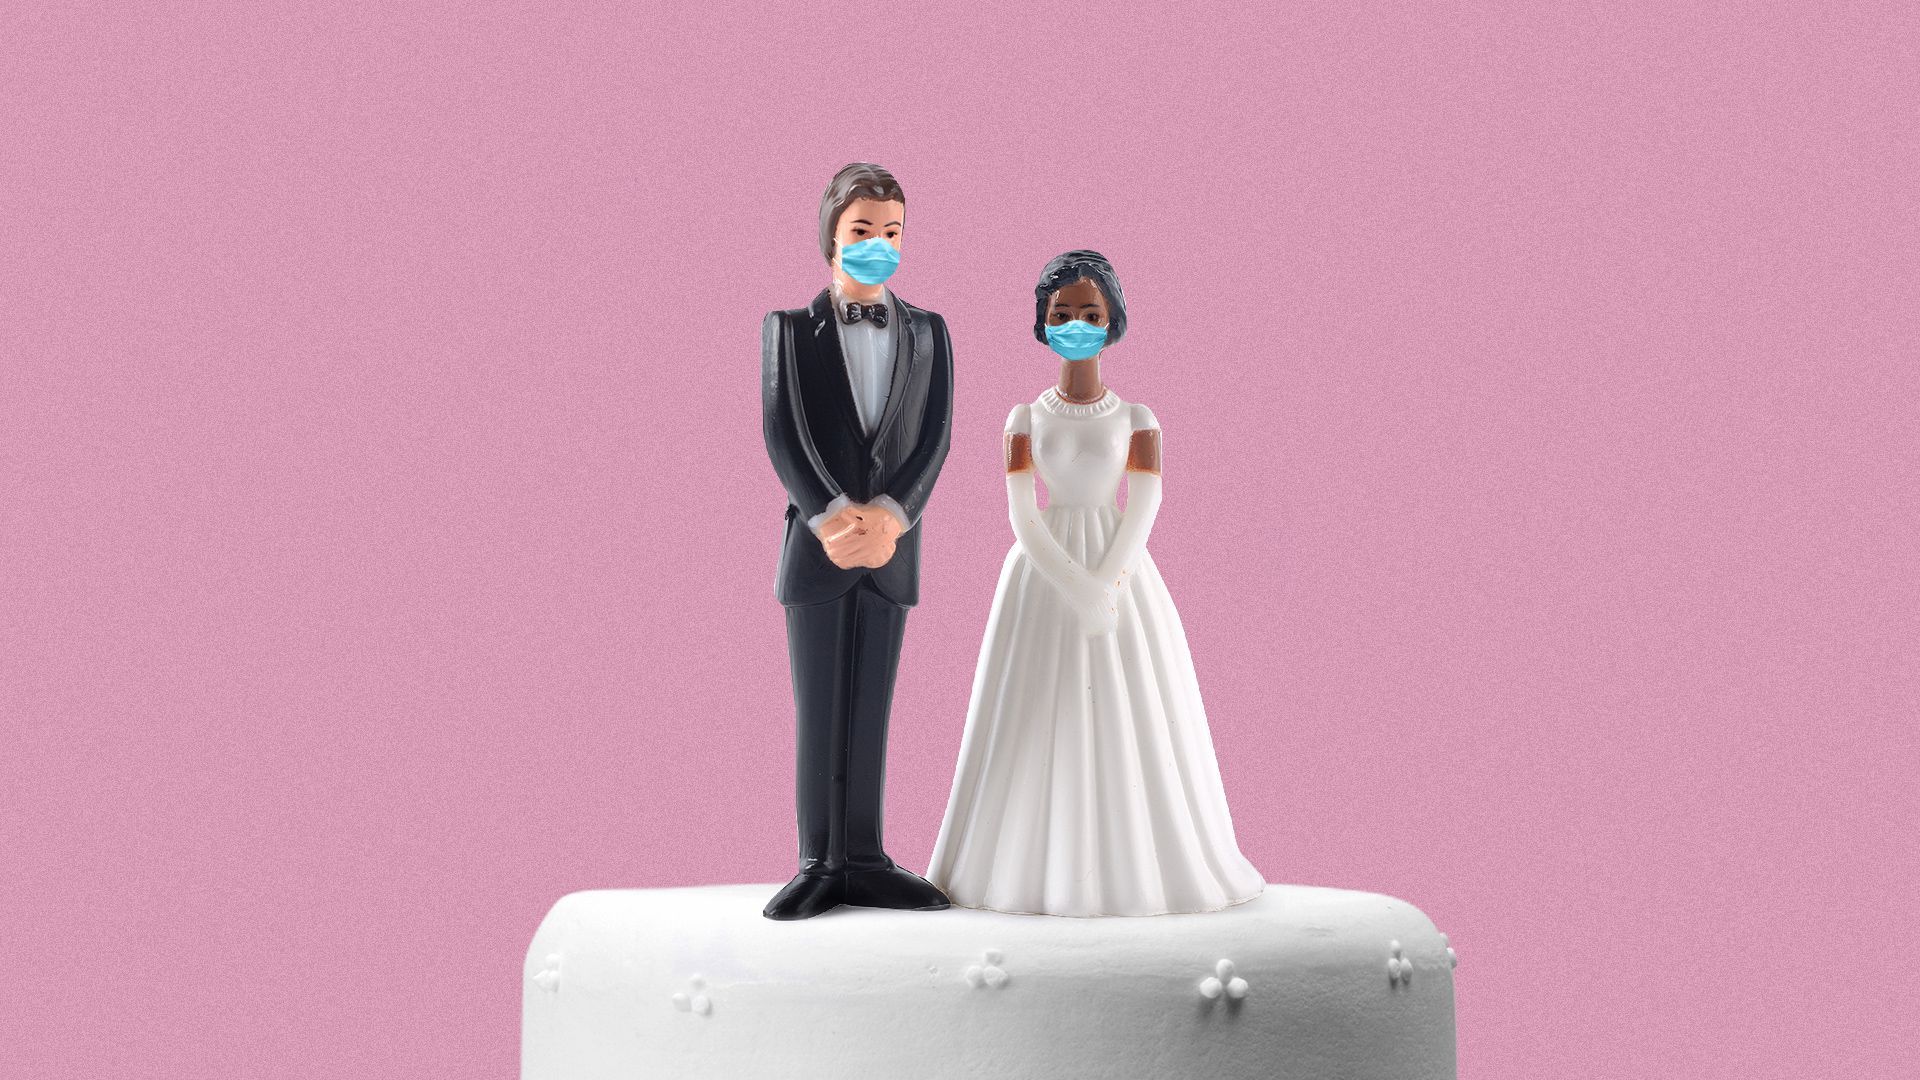 Illustration of the top of a wedding cake with the bride and groom figurines wearing surgical masks